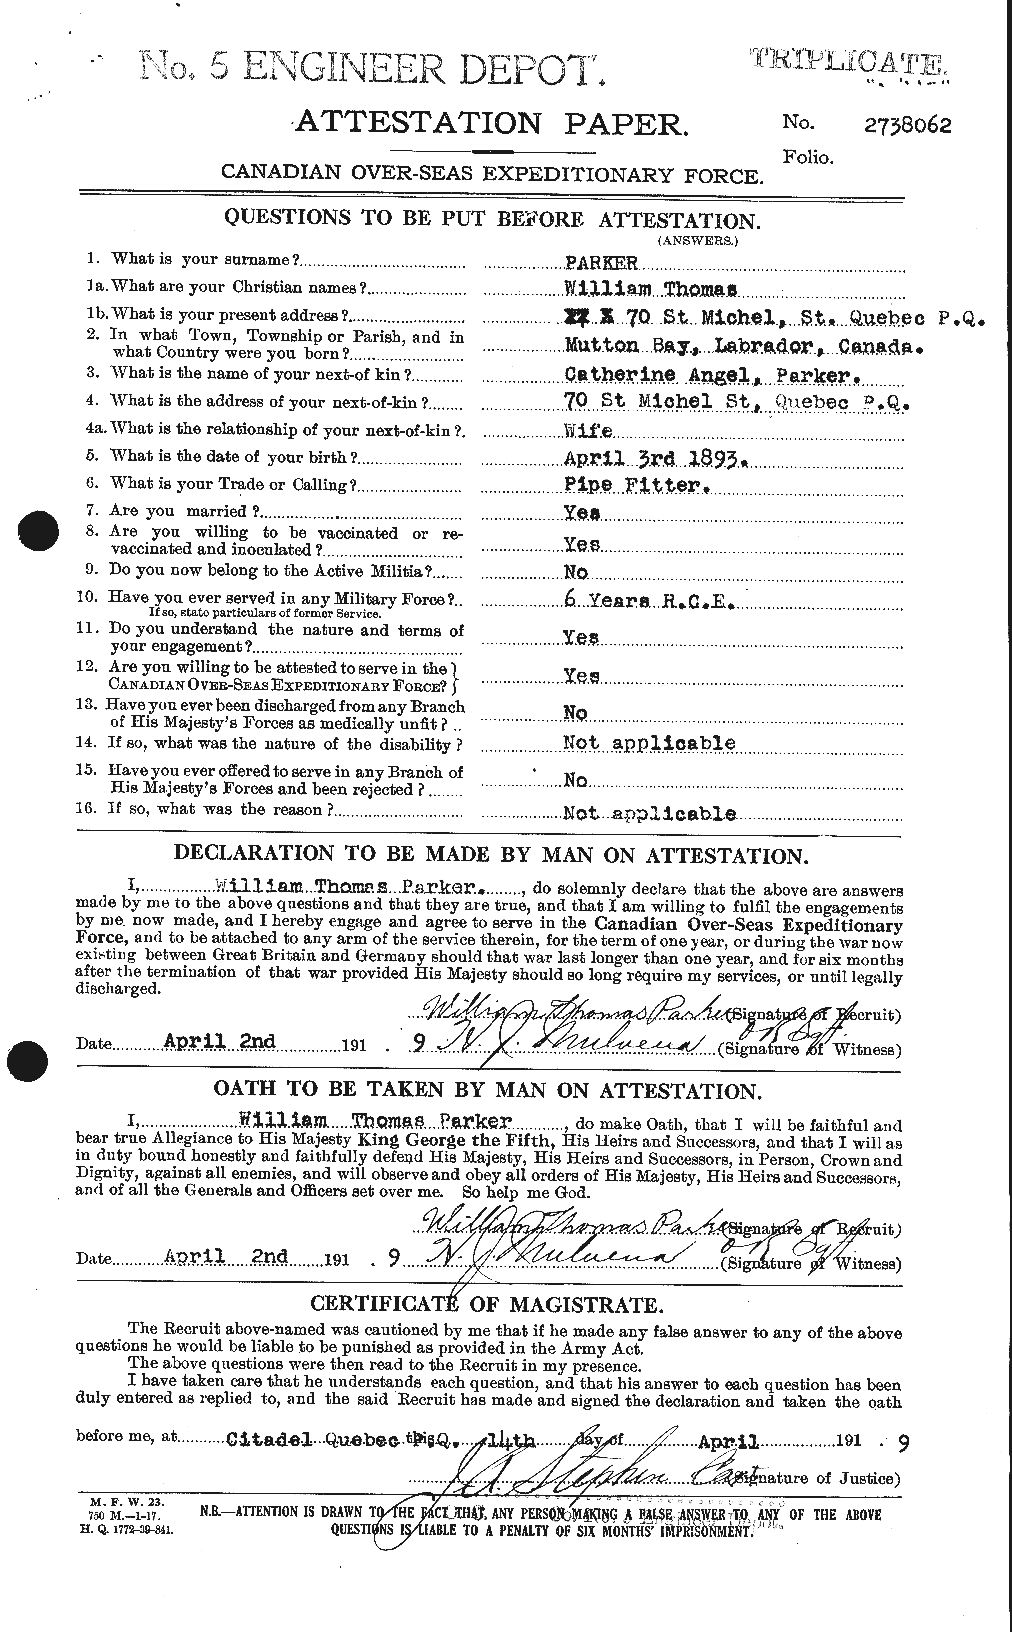 Personnel Records of the First World War - CEF 565787a